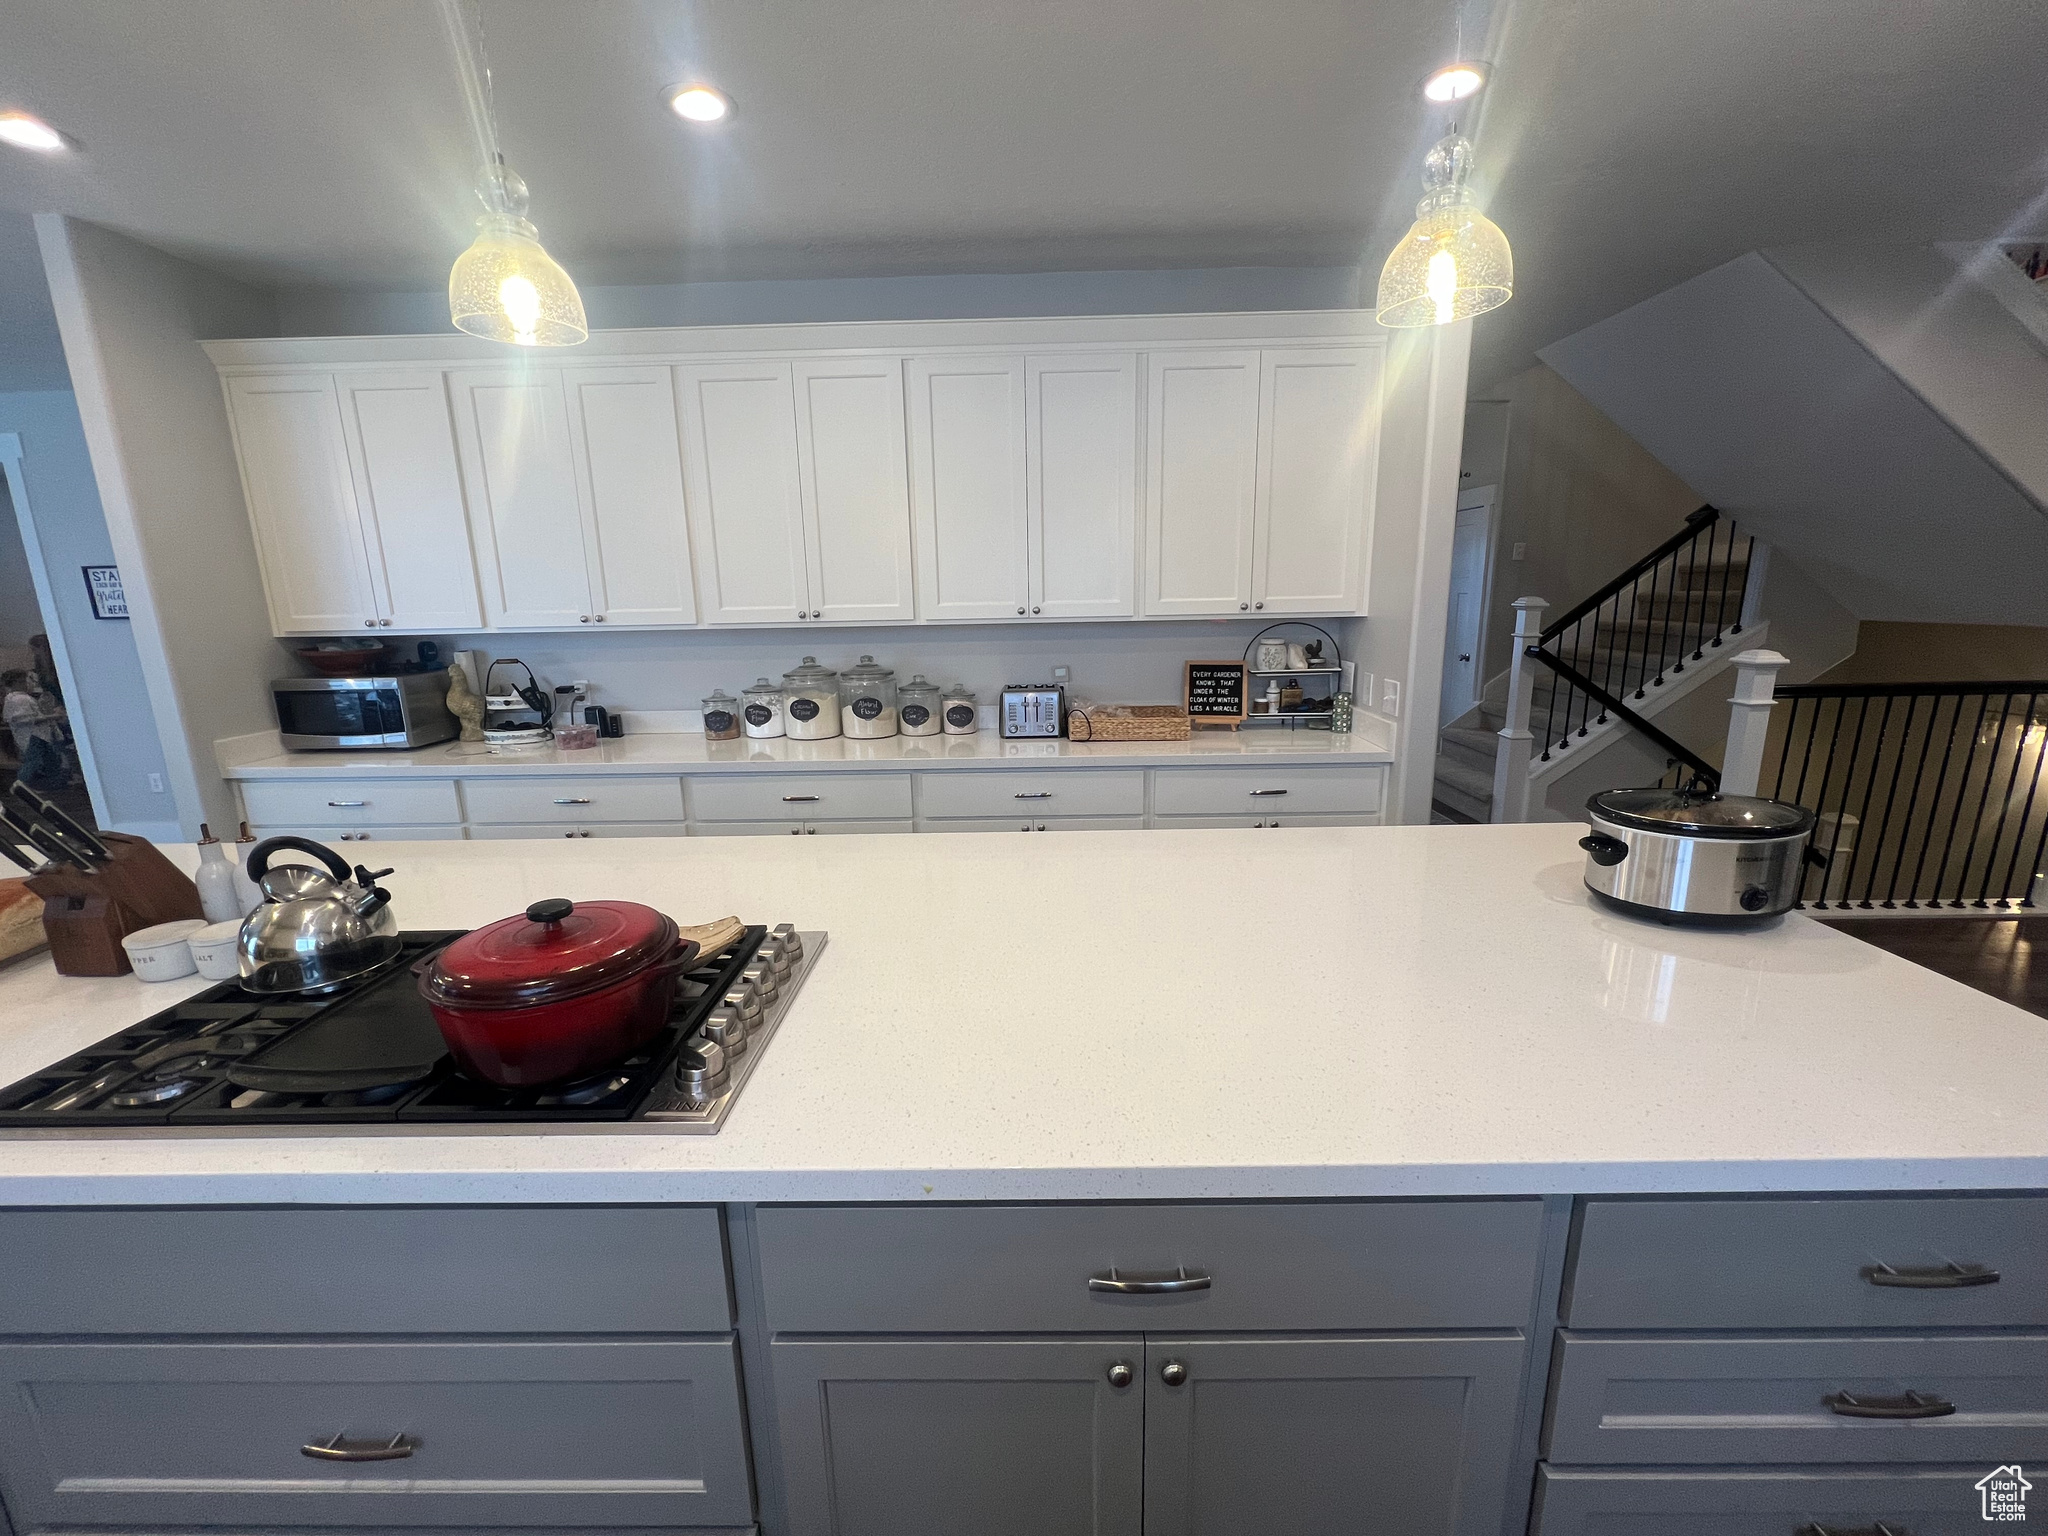 Kitchen featuring pendant lighting, gray cabinets, black gas stovetop, and white cabinetry